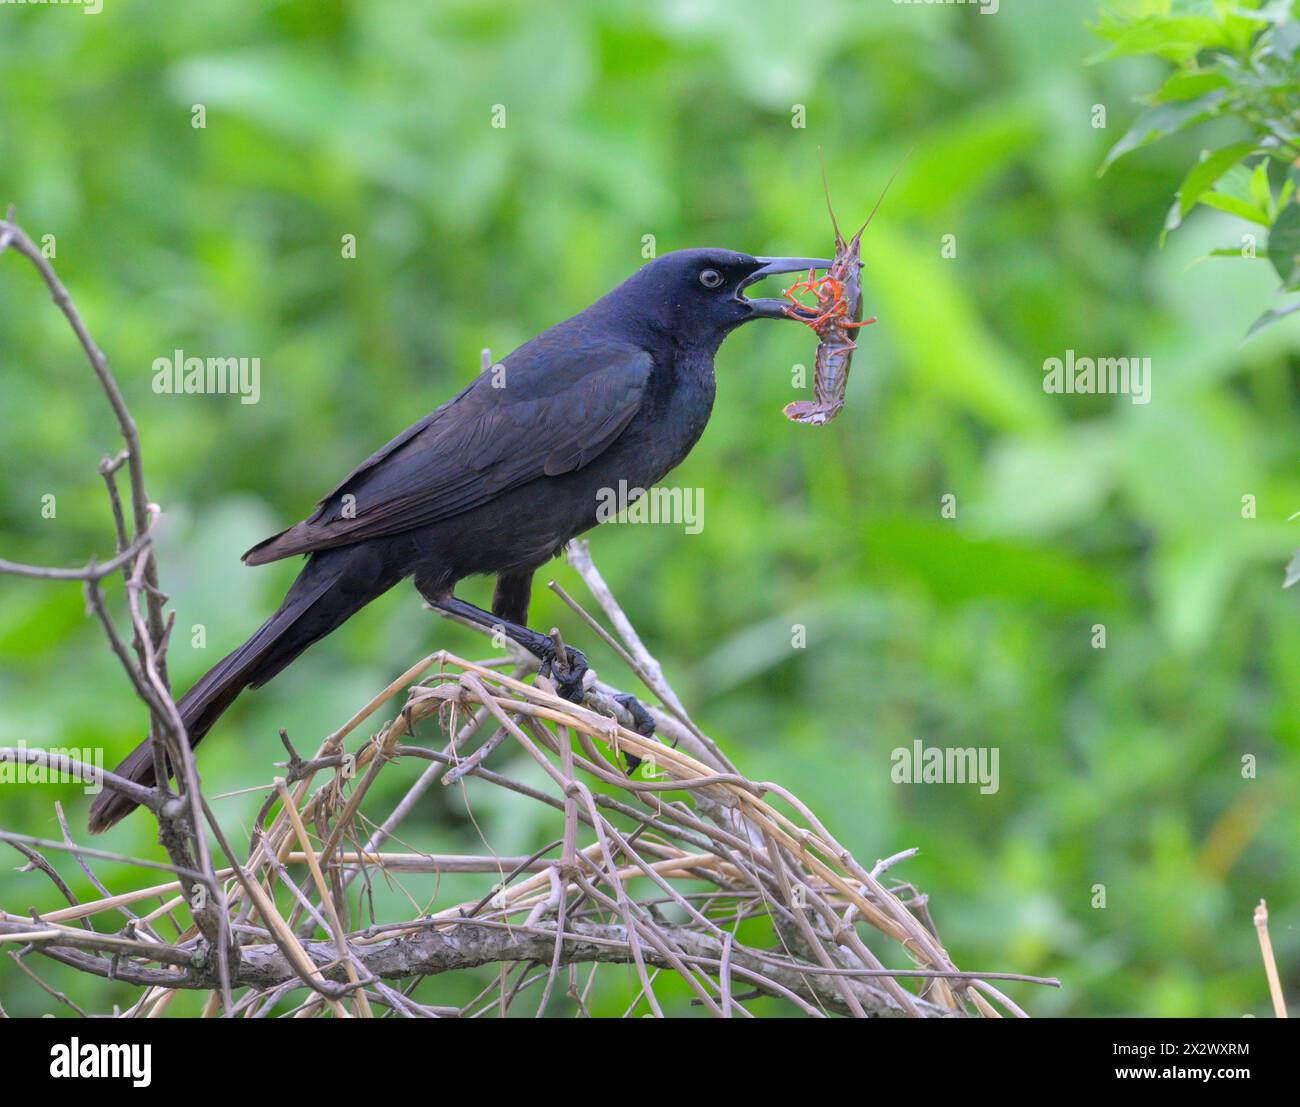 Boat-tailed grackle (Quiscalus major) eating a Red Swamp Crayfish (Procambarus clarkii) Brazos Bend State Park, Texas, USA. Stock Photo